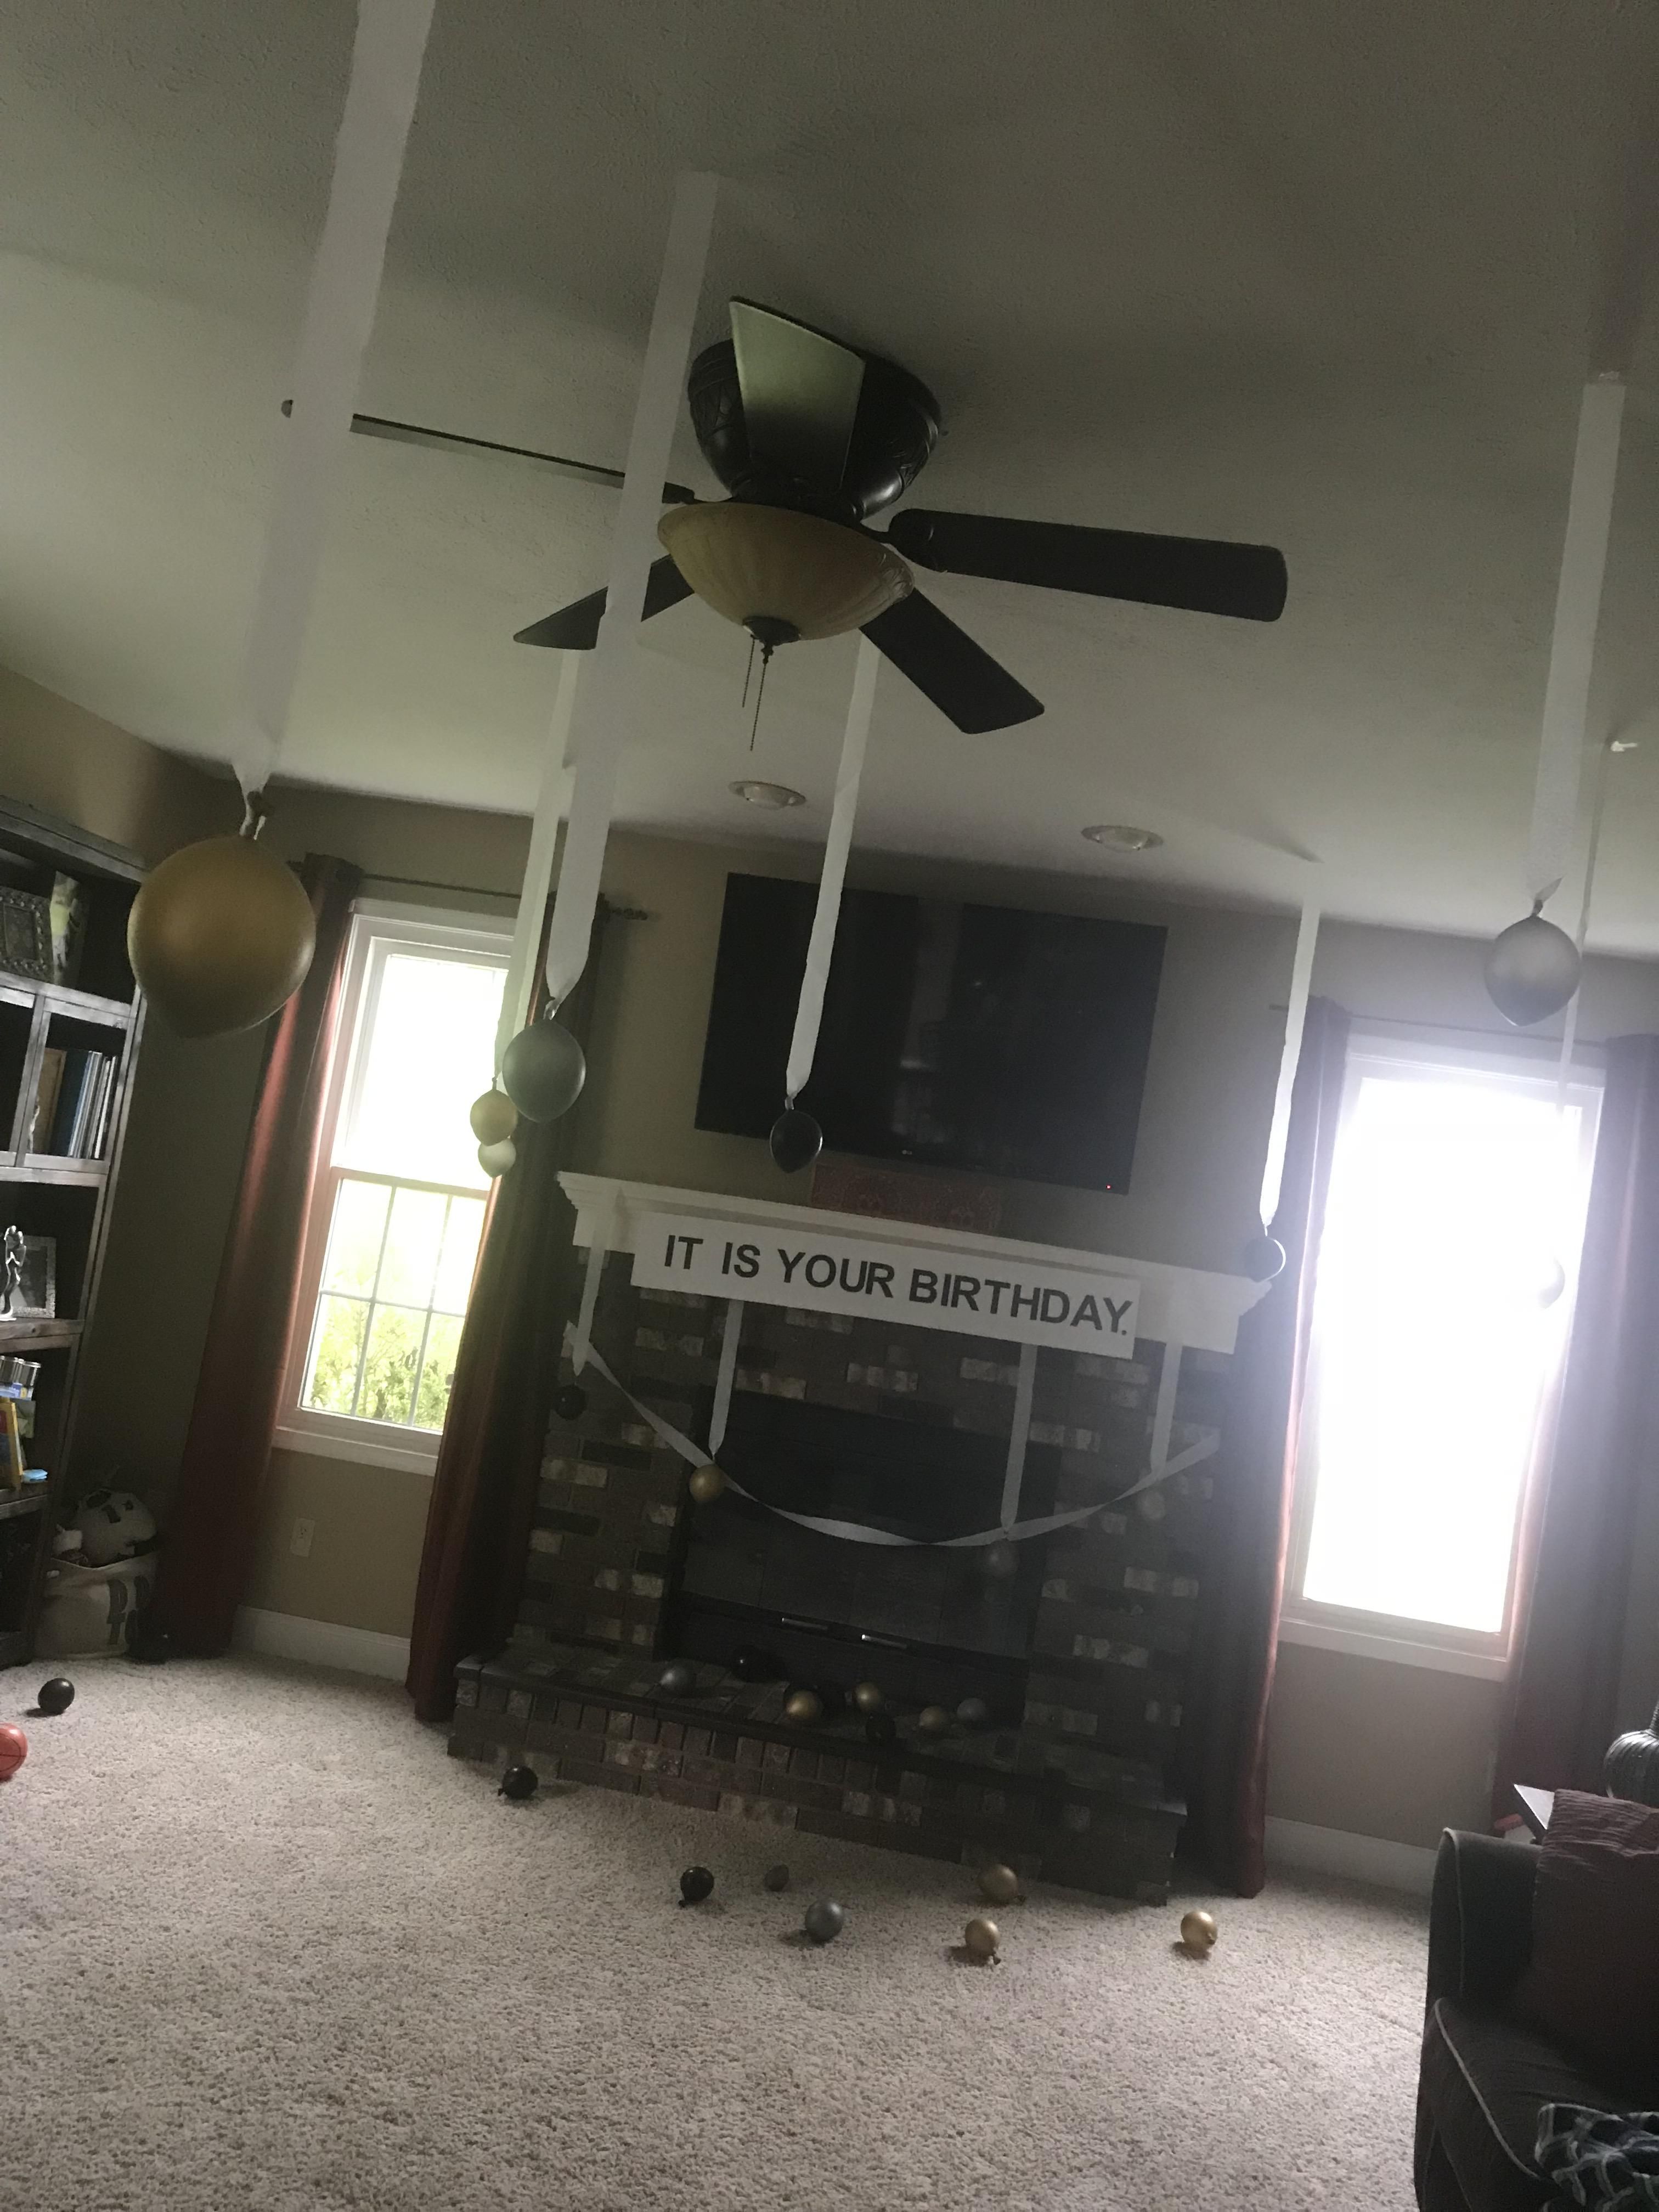 I turn 30 today. My husband thought Dwight & Jim style “The Office” decor was appropriate.